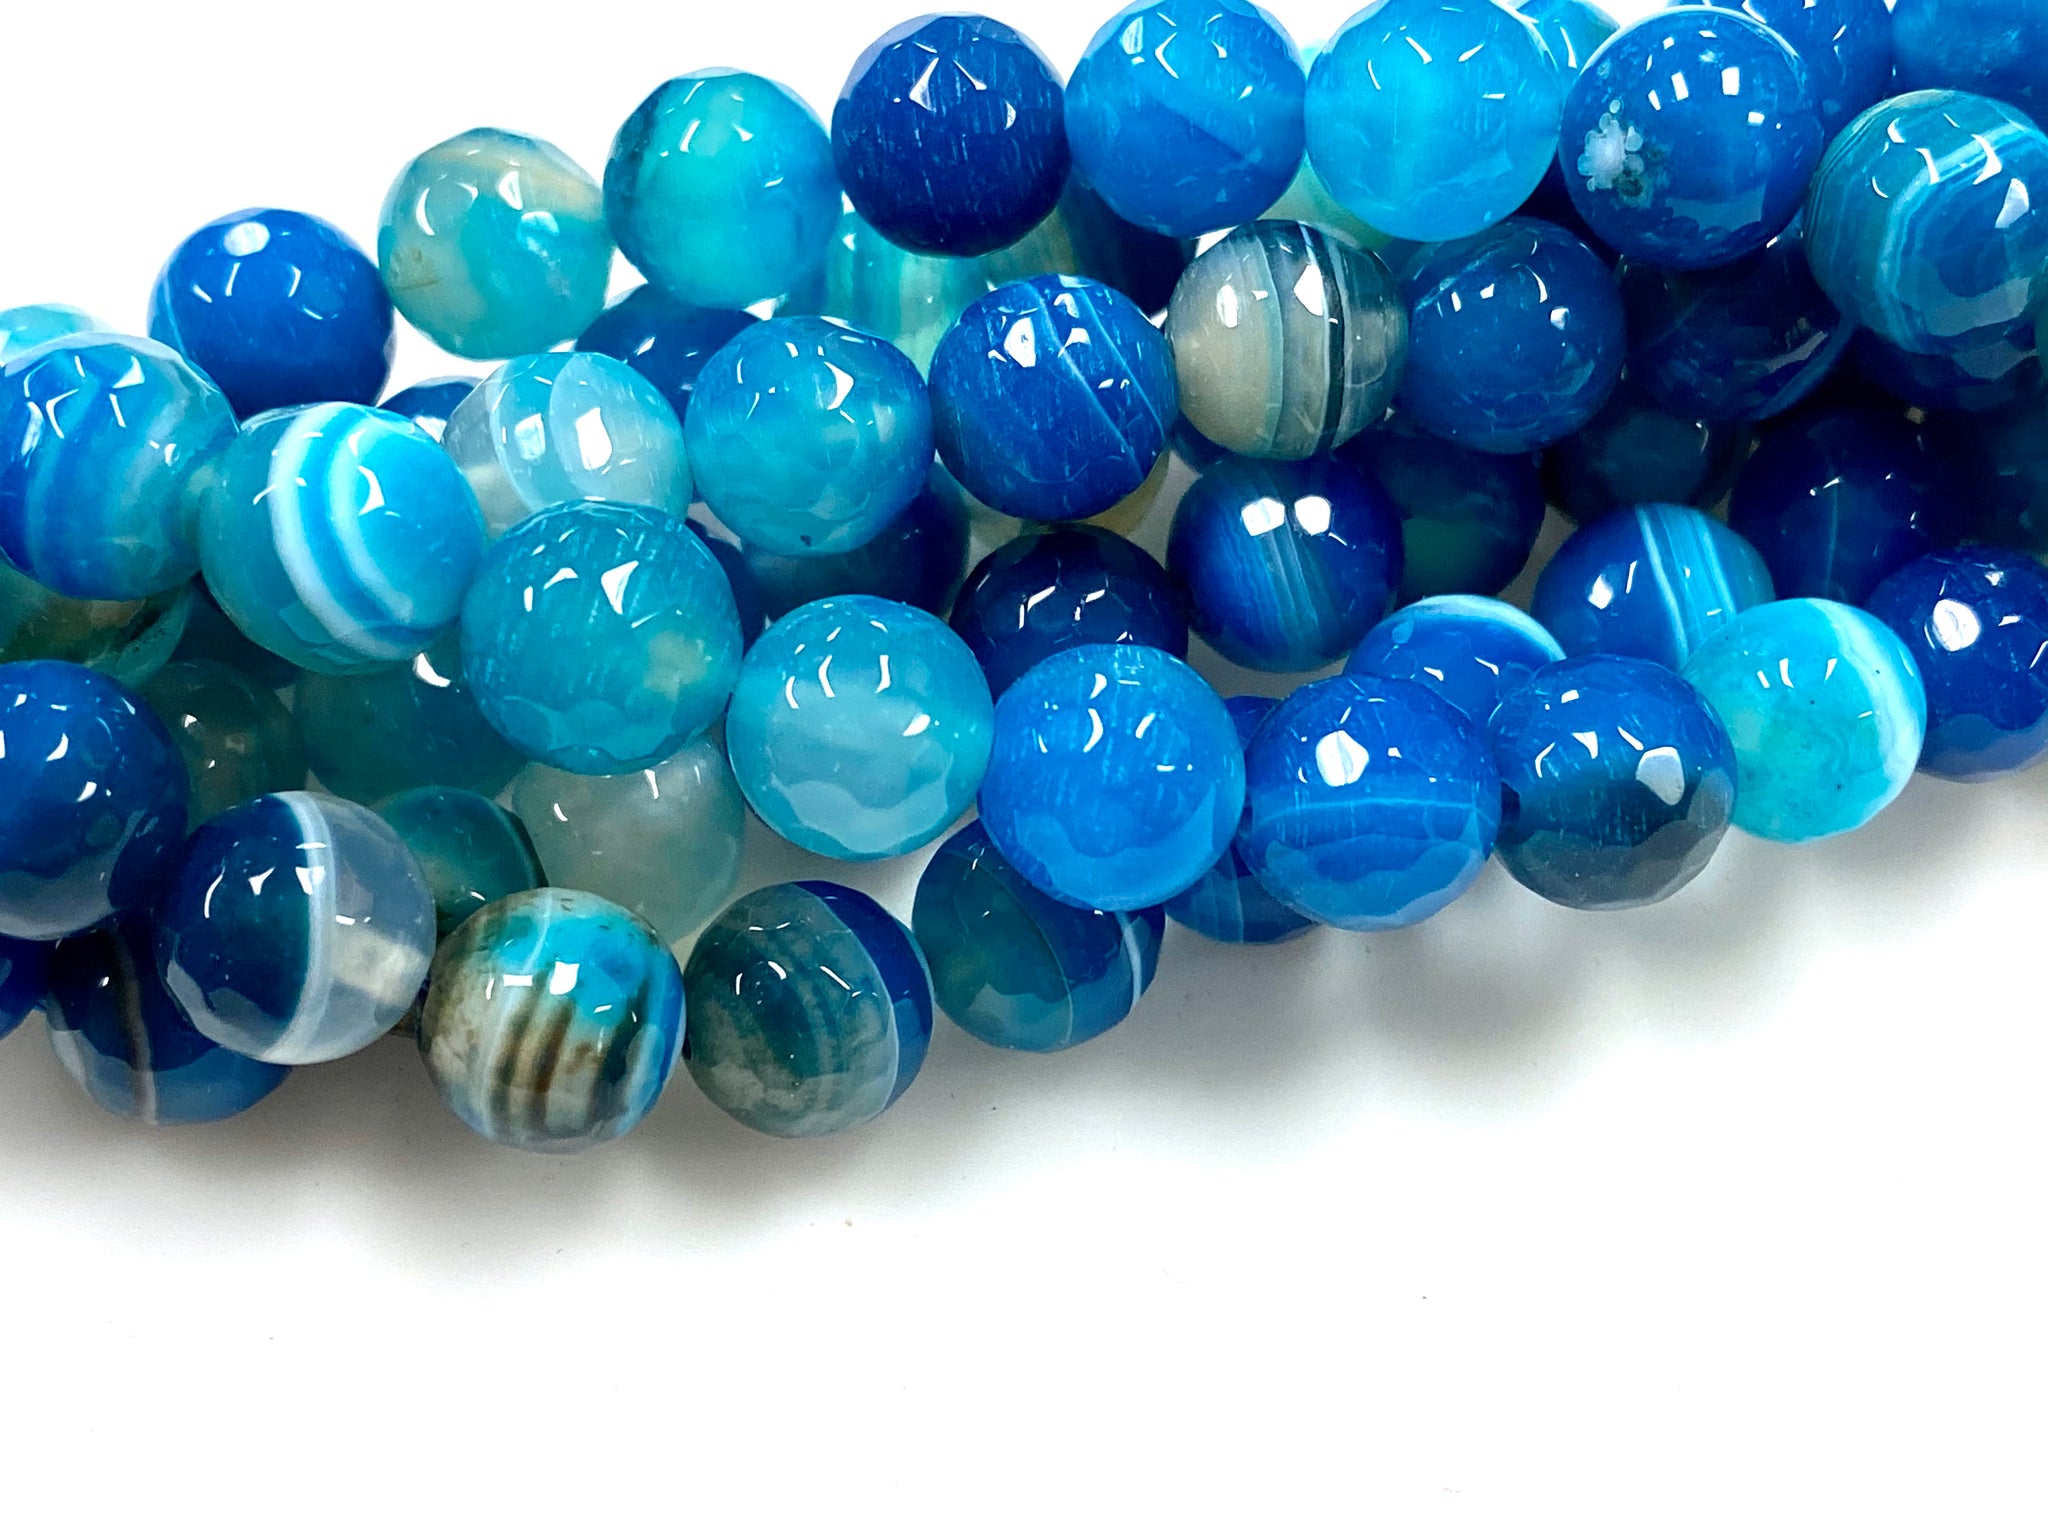 Natural Stripe Blue Agate Gemstone Beads / Faceted Round Shape Beads / Healing Energy Stone Beads / 10mm 2 Strands Beads